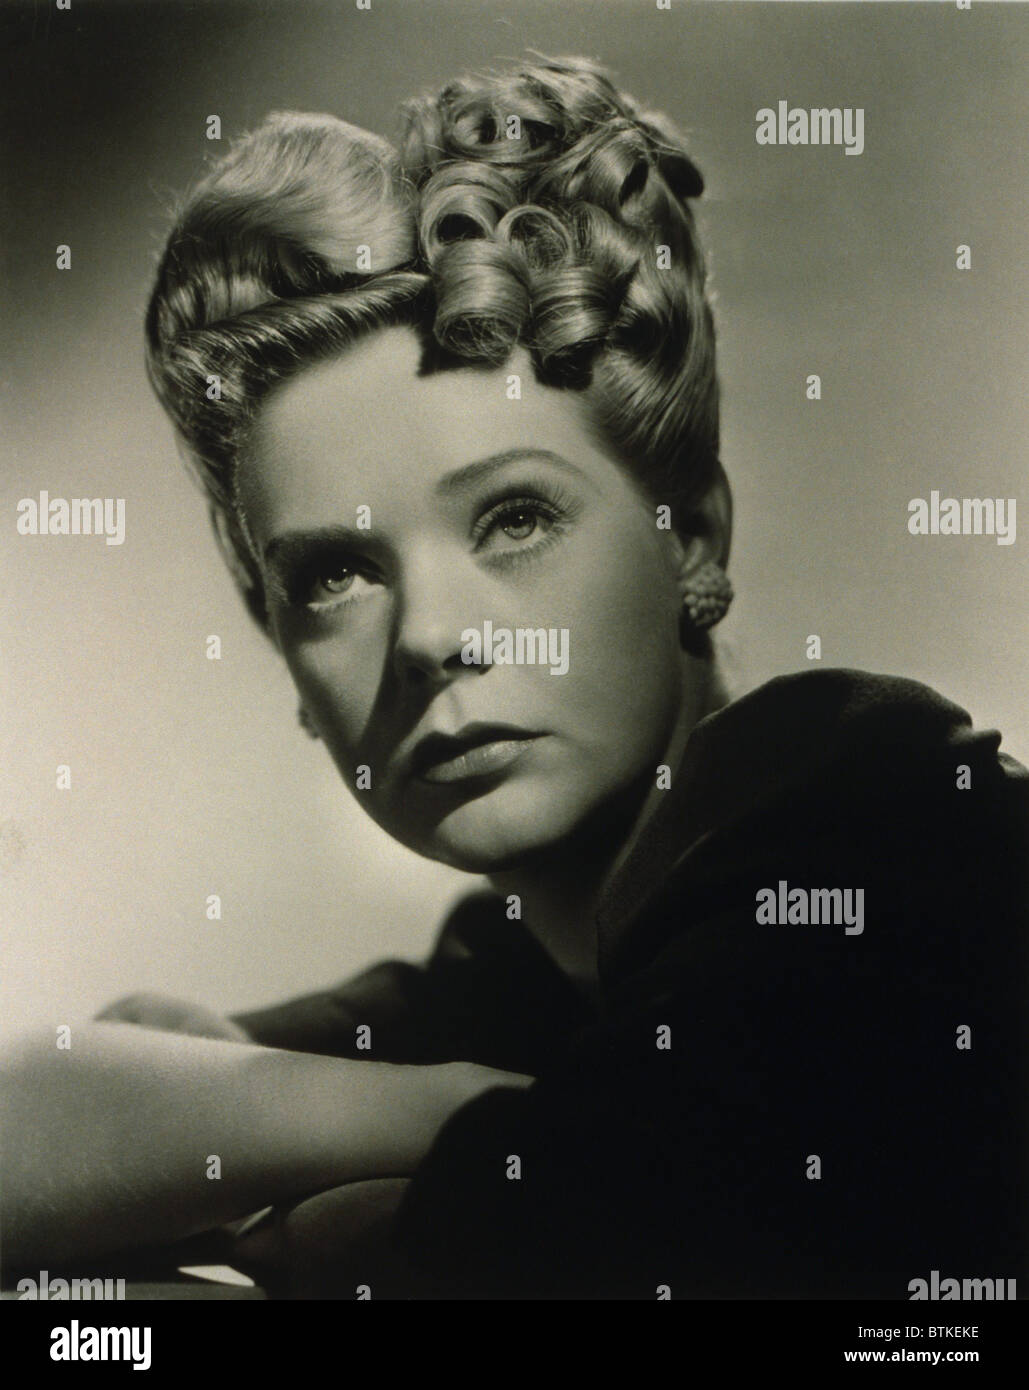 Alice Faye (1915-1998) American singer and actress, in the hairstyle she wore in the 1943 movie, THE GANG'S ALL HERE. Stock Photo